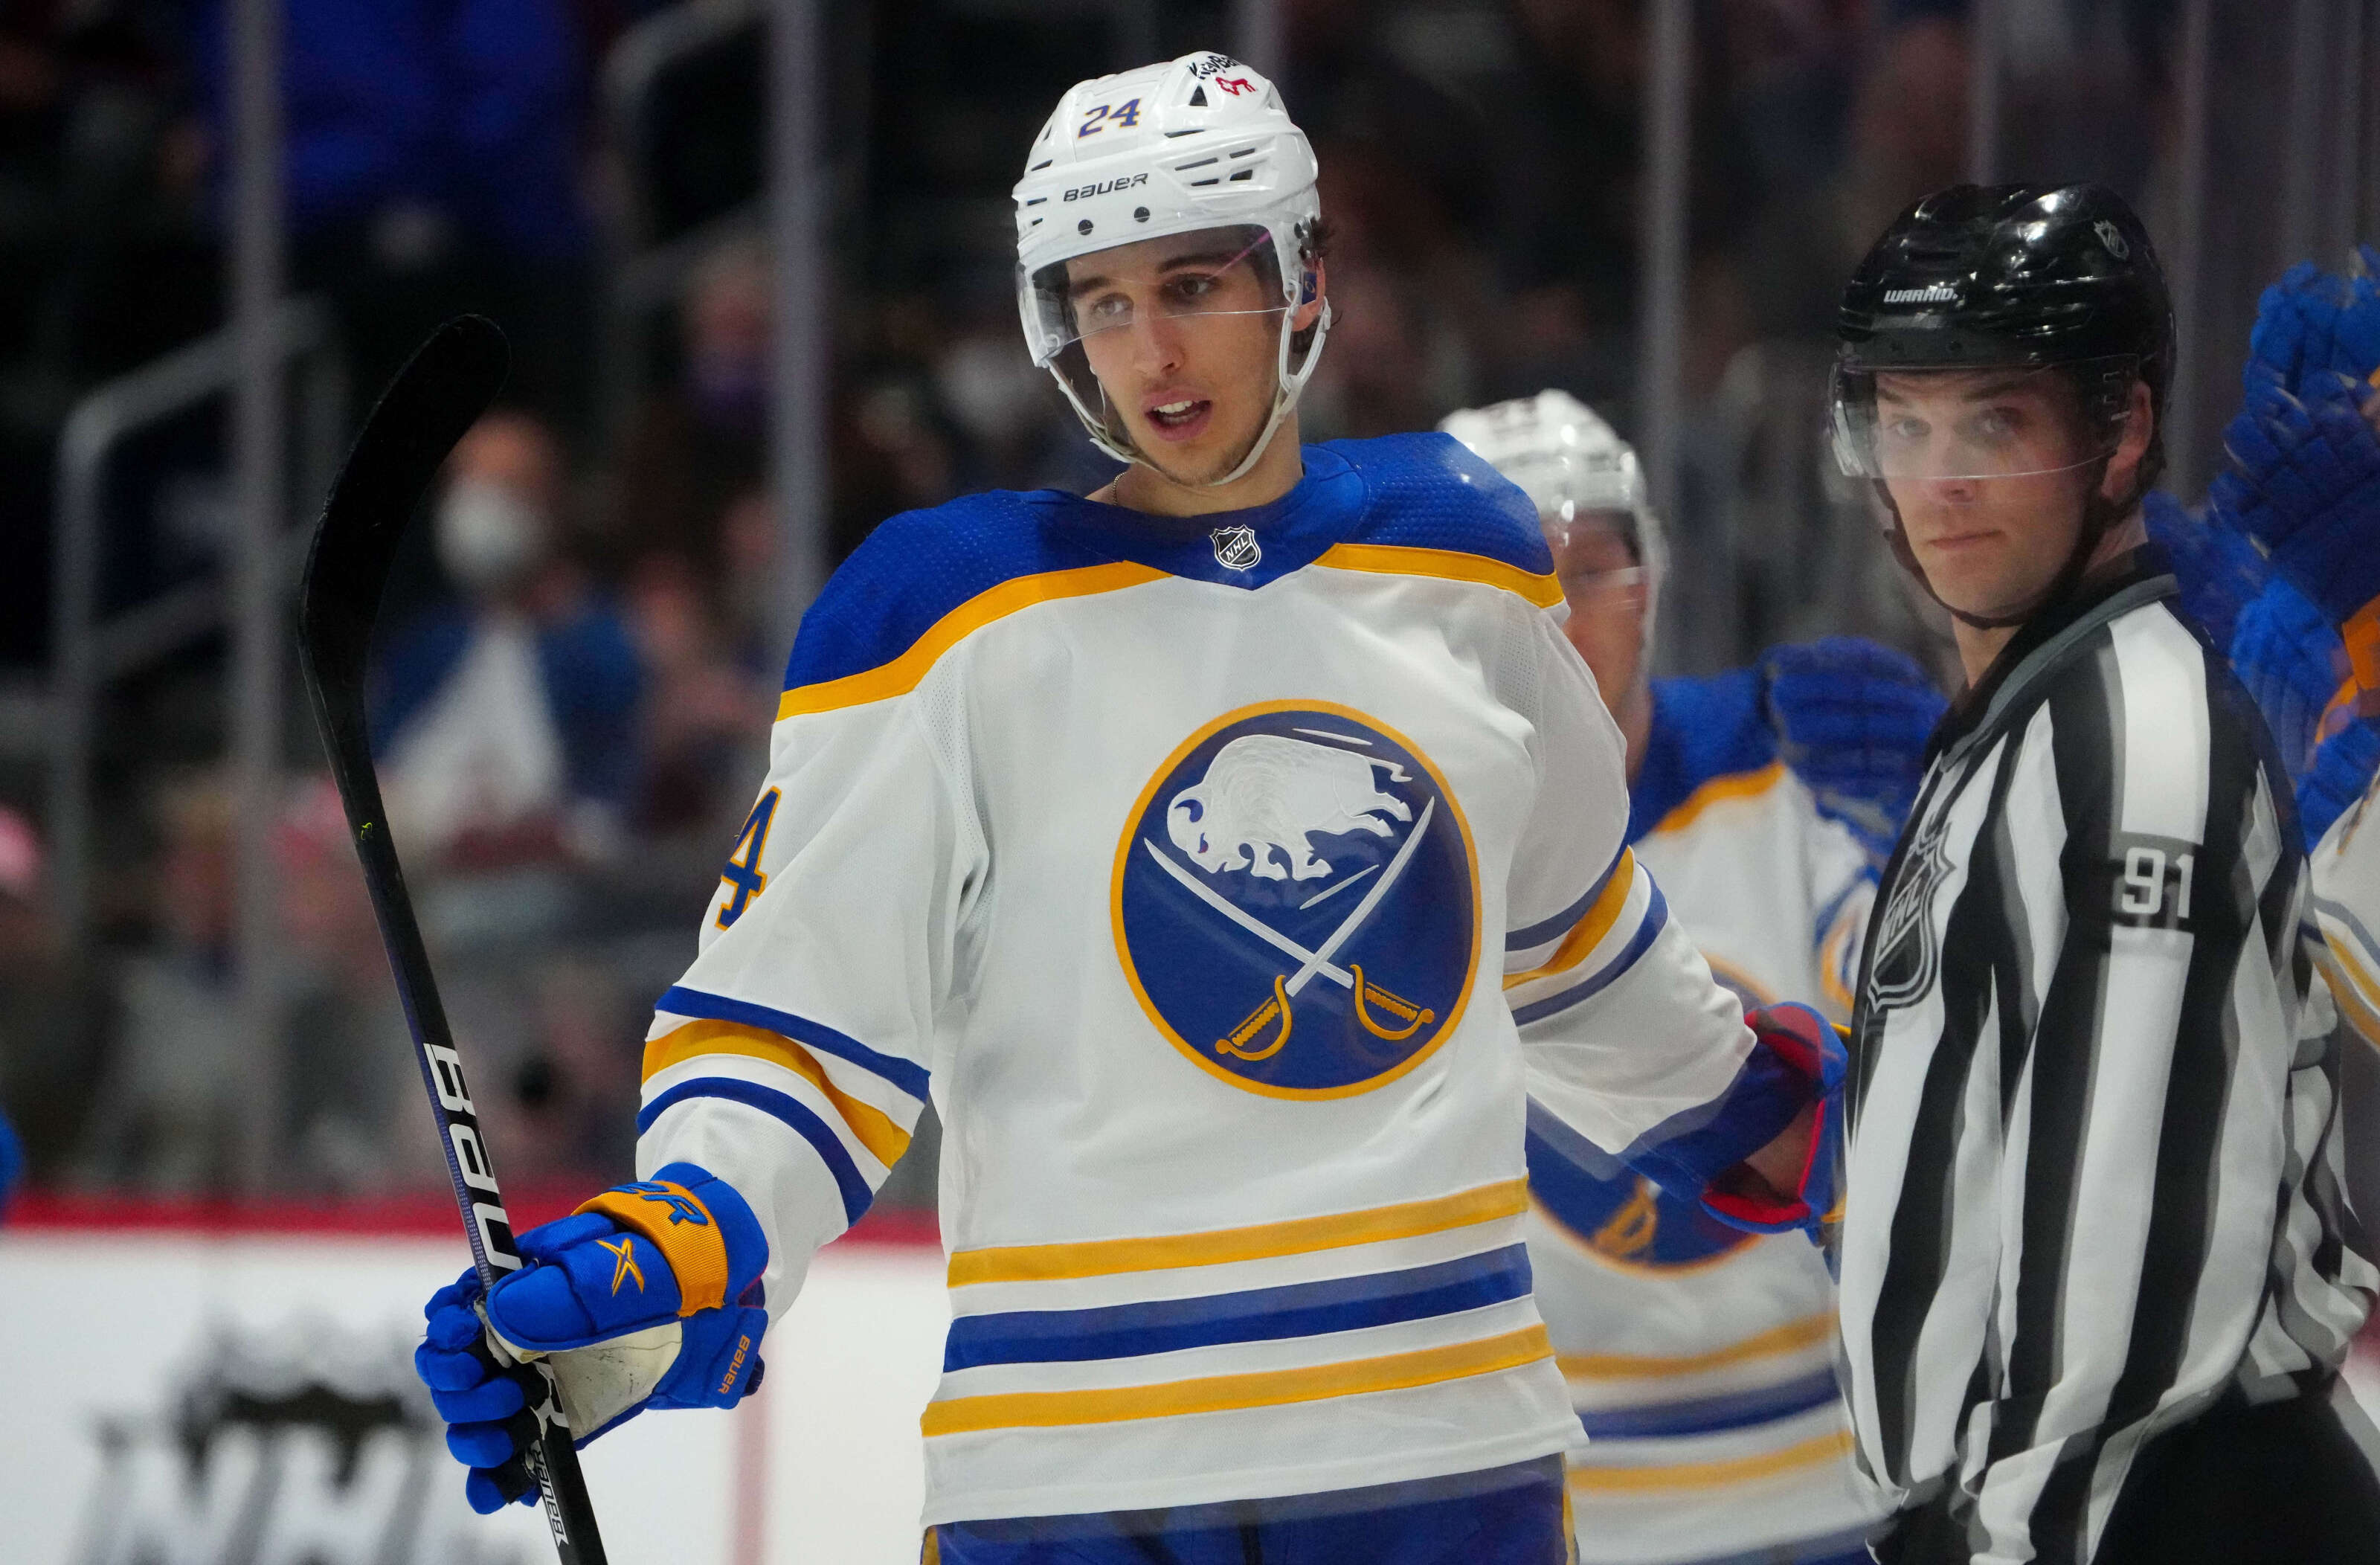 Buffalo Sabres have an opportunity to regain momentum